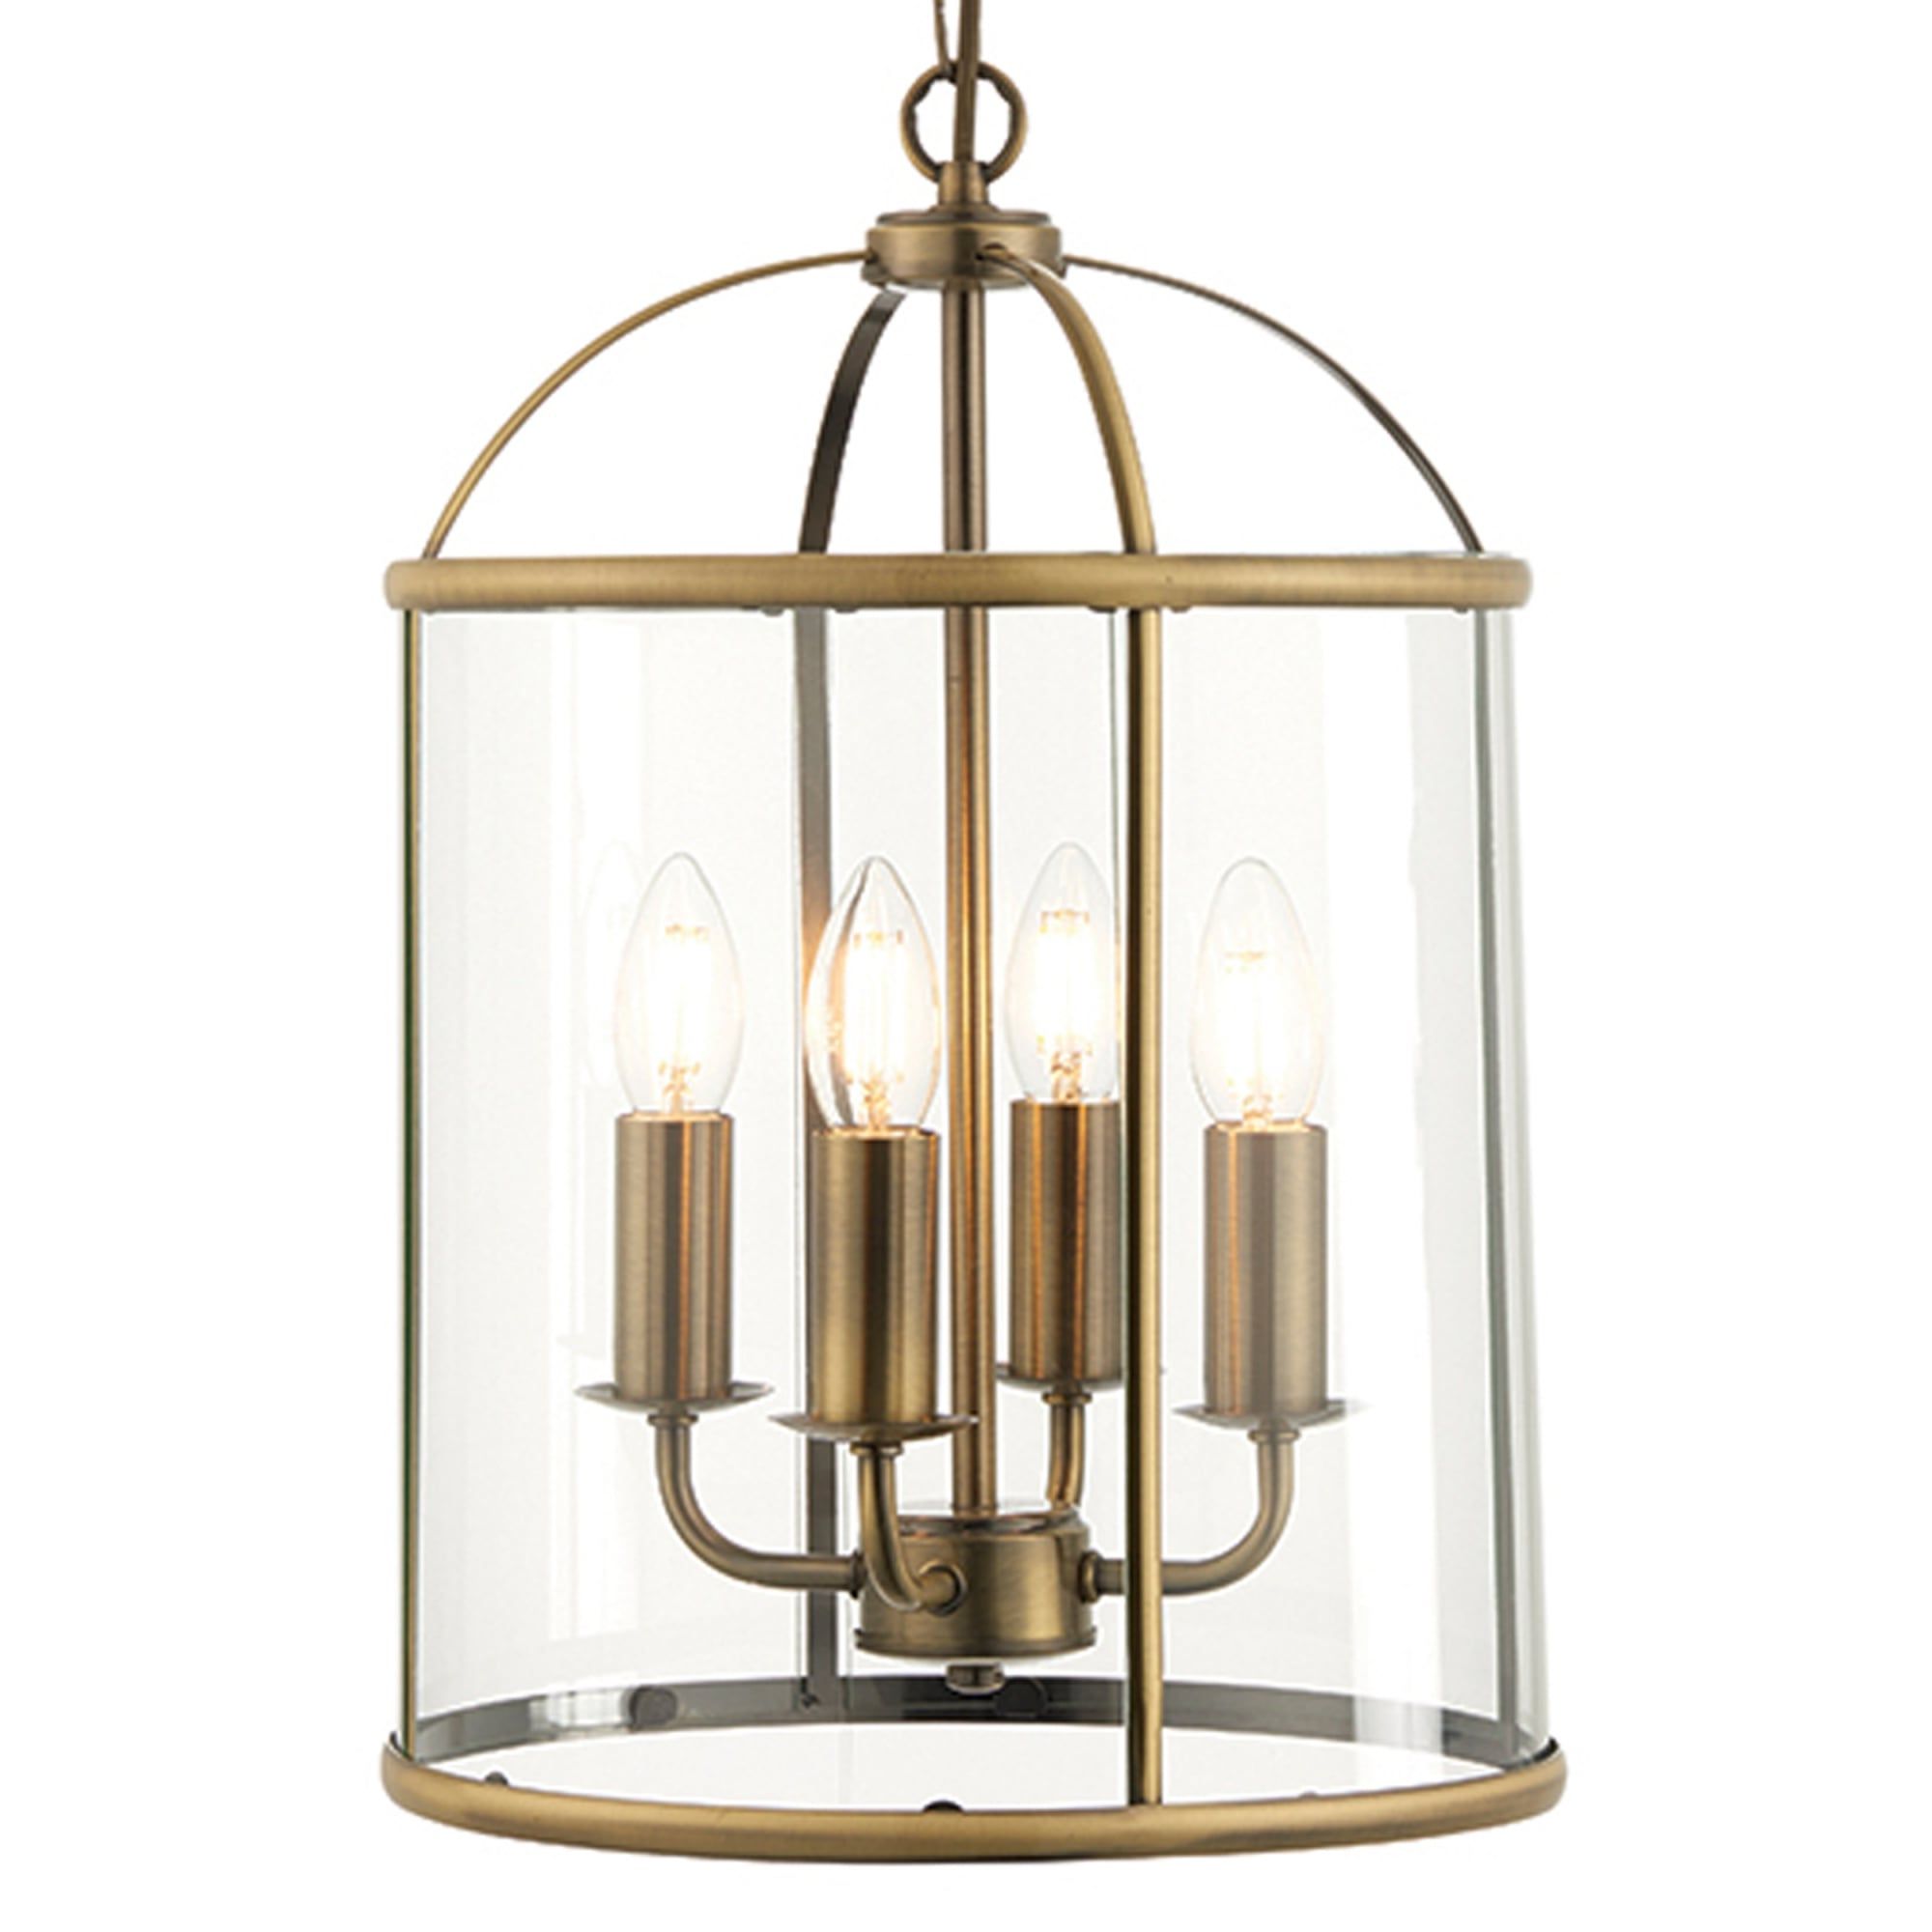 Best And Newest Endon 69455 Lambeth 4 Light Antique Brass And Glass Lantern Pendant In Aged Brass Lantern Chandeliers (View 9 of 15)